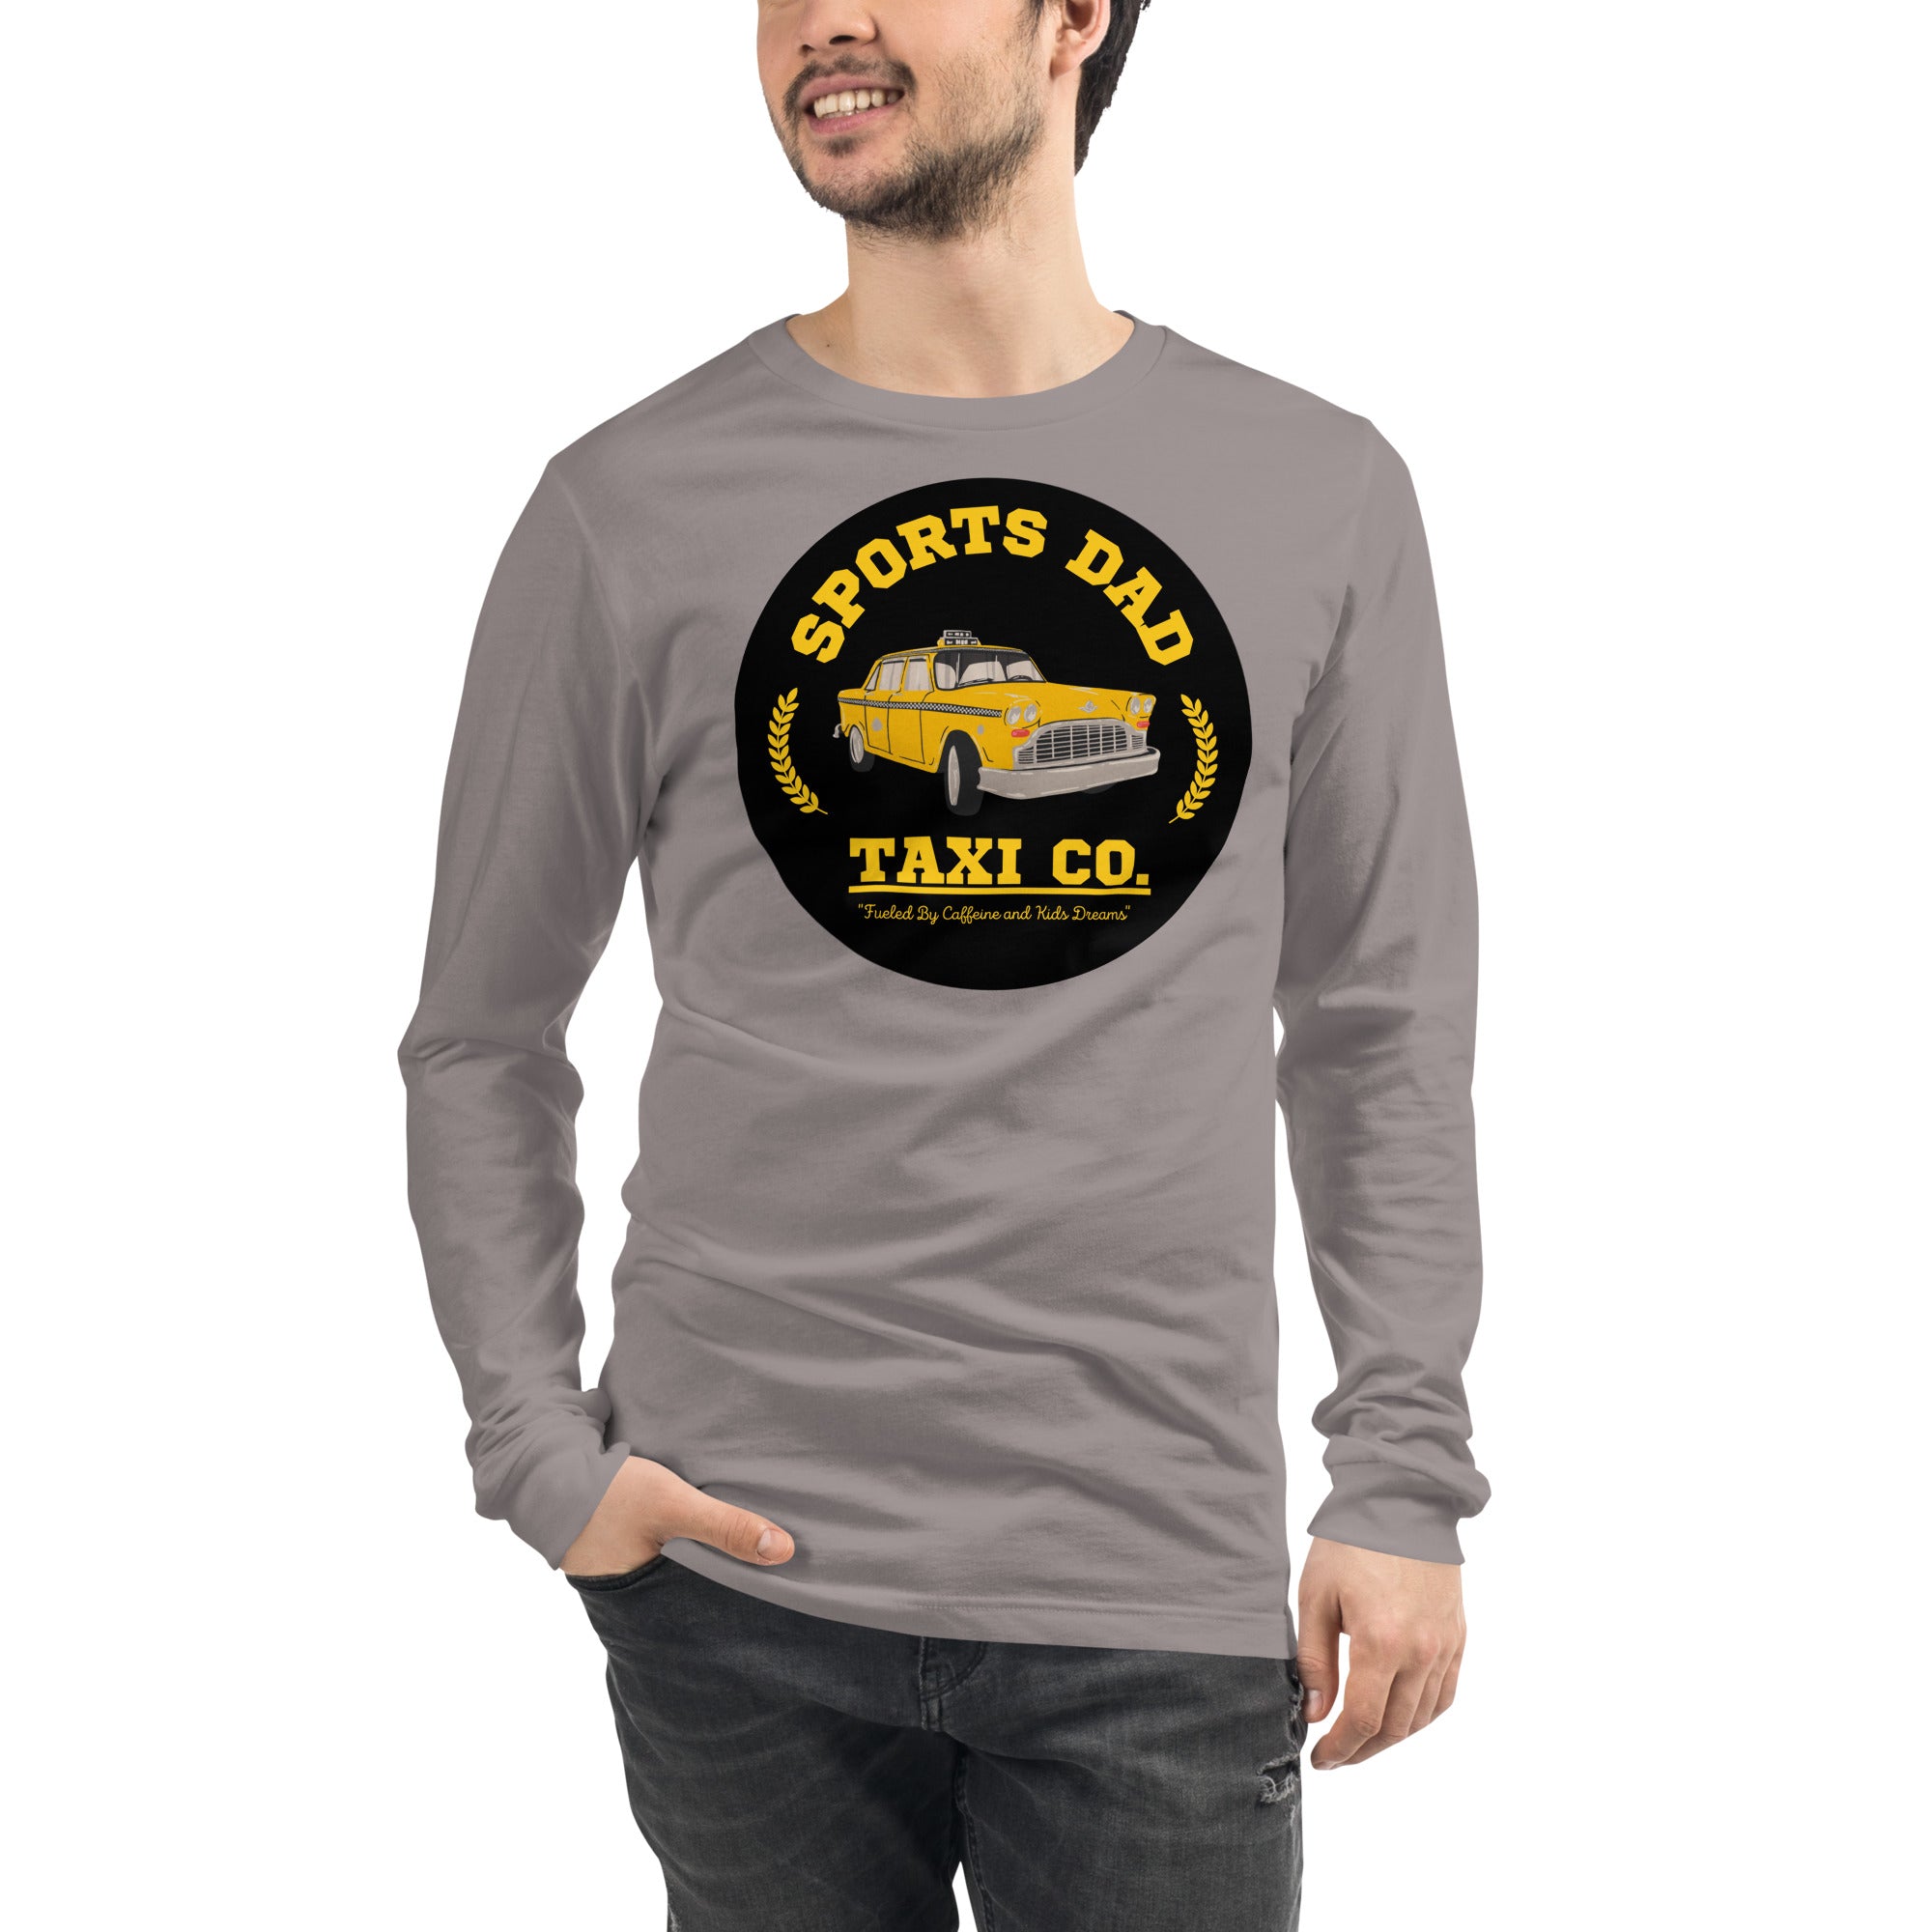 The Sports Dad Taxi Co. Original Long Sleeve